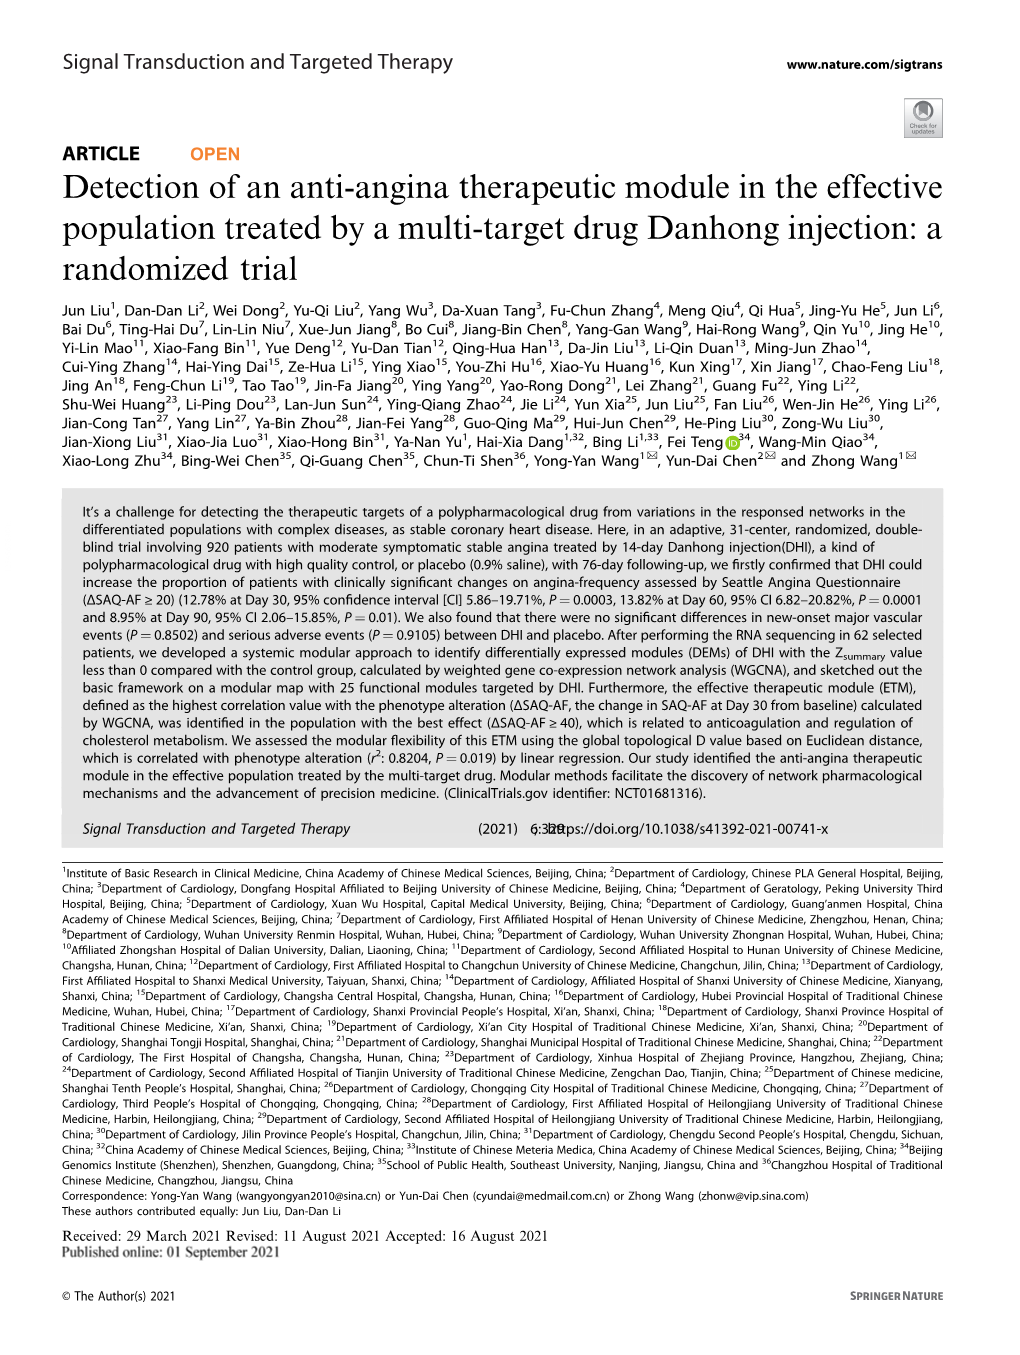 Detection of an Anti-Angina Therapeutic Module in the Effective Population Treated by a Multi-Target Drug Danhong Injection: a Randomized Trial